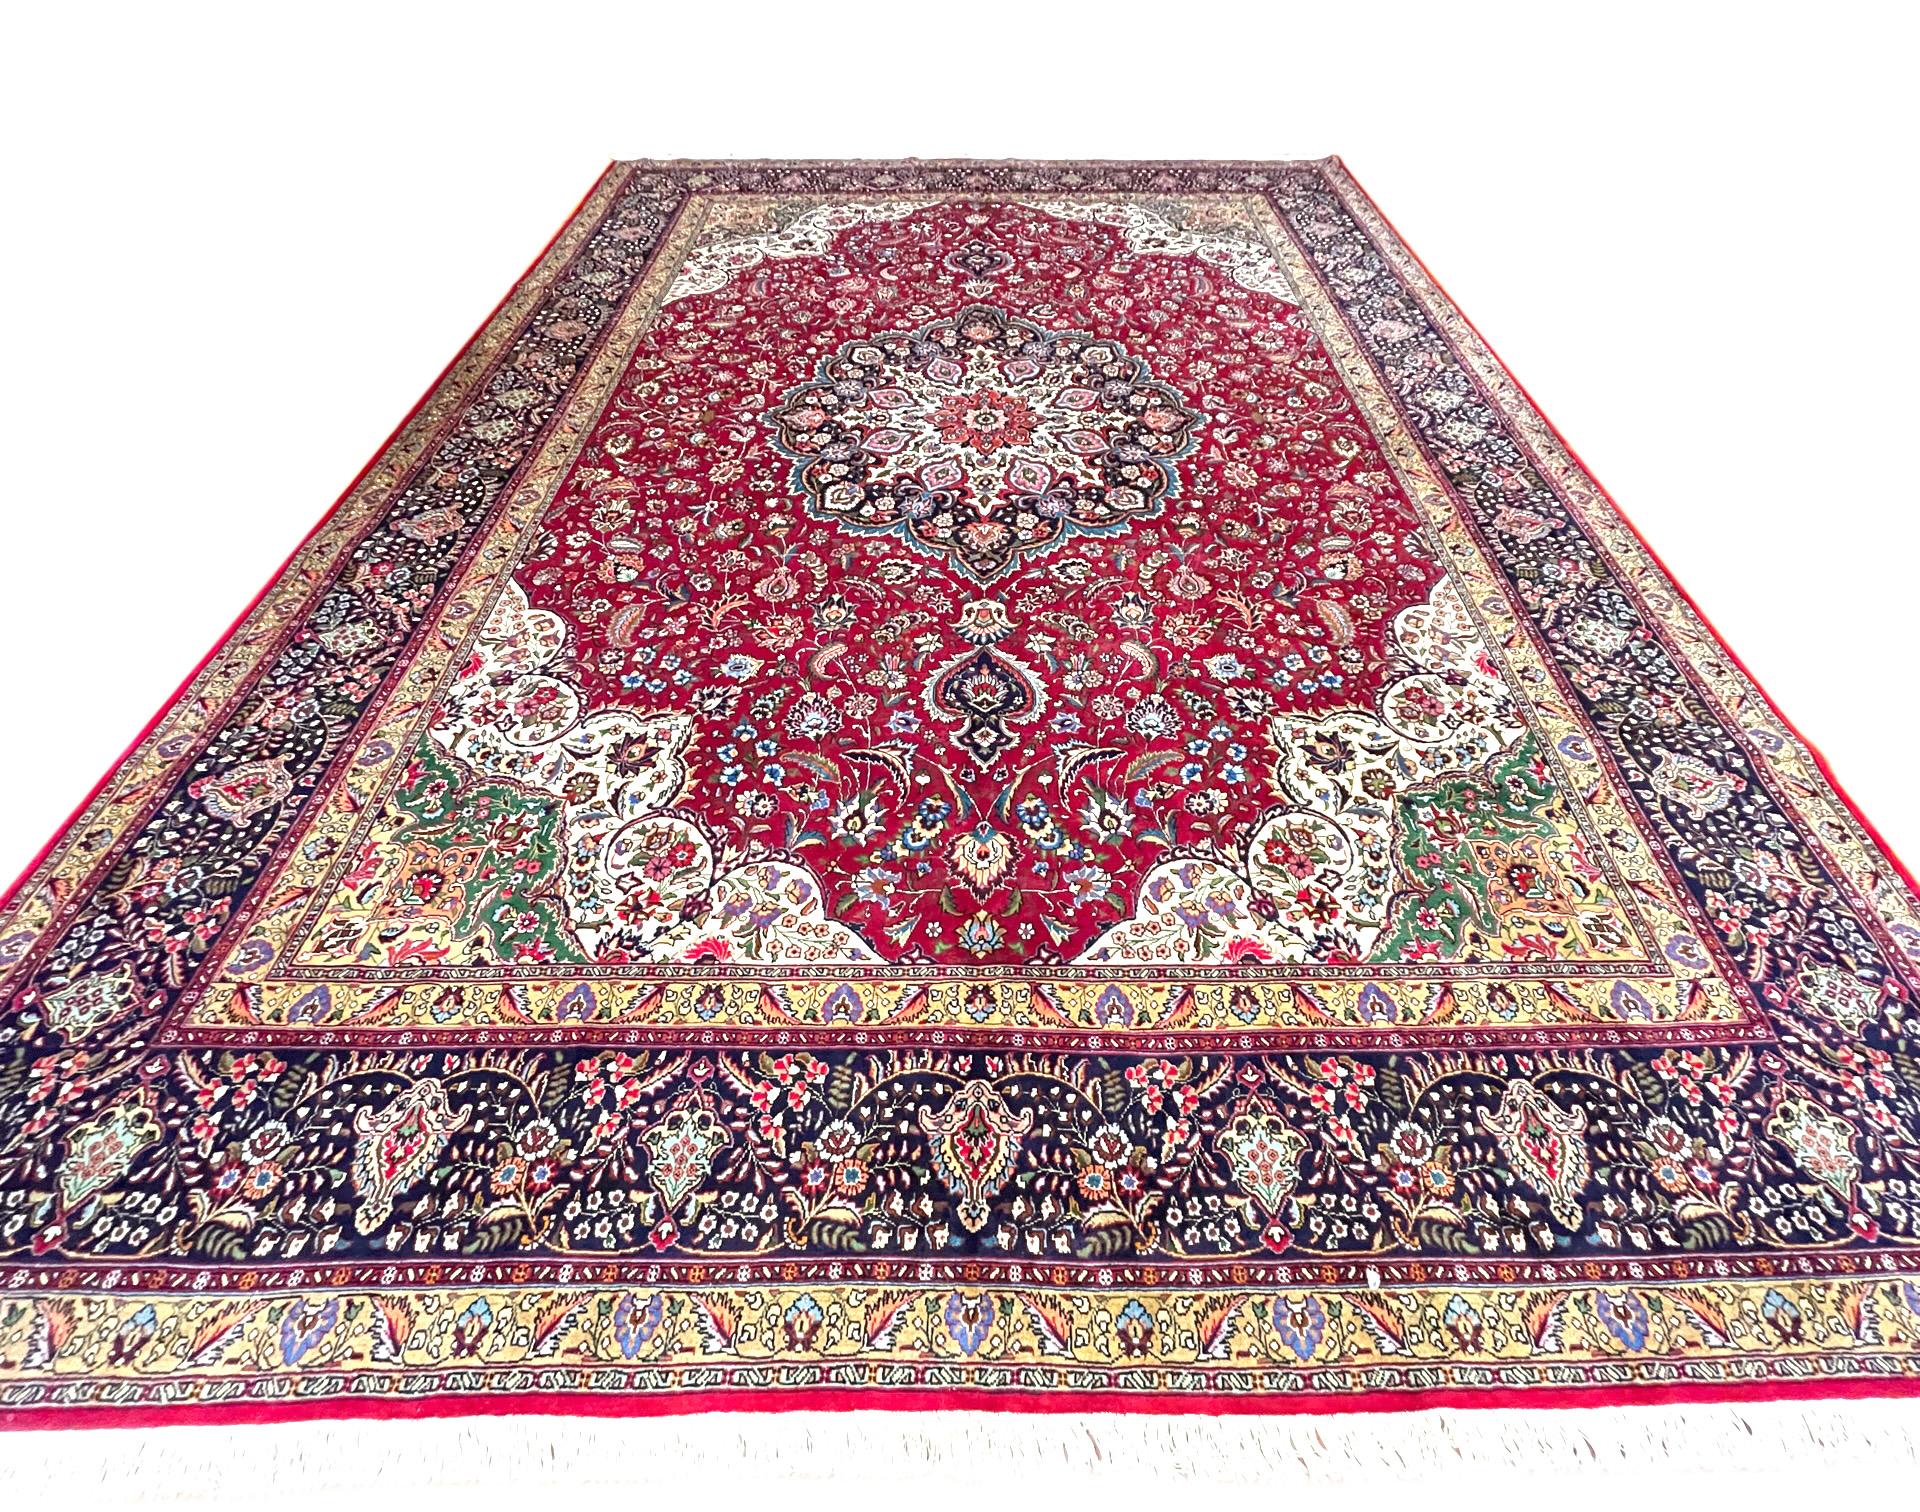 This rug is a hand-knotted Persian Tabriz rug with a great quality. Tabriz is one of the oldest rug weaving centers and makes a huge diversity of types of rugs. This rug features a floral medallion pattern and has wool pile and cotton foundation.